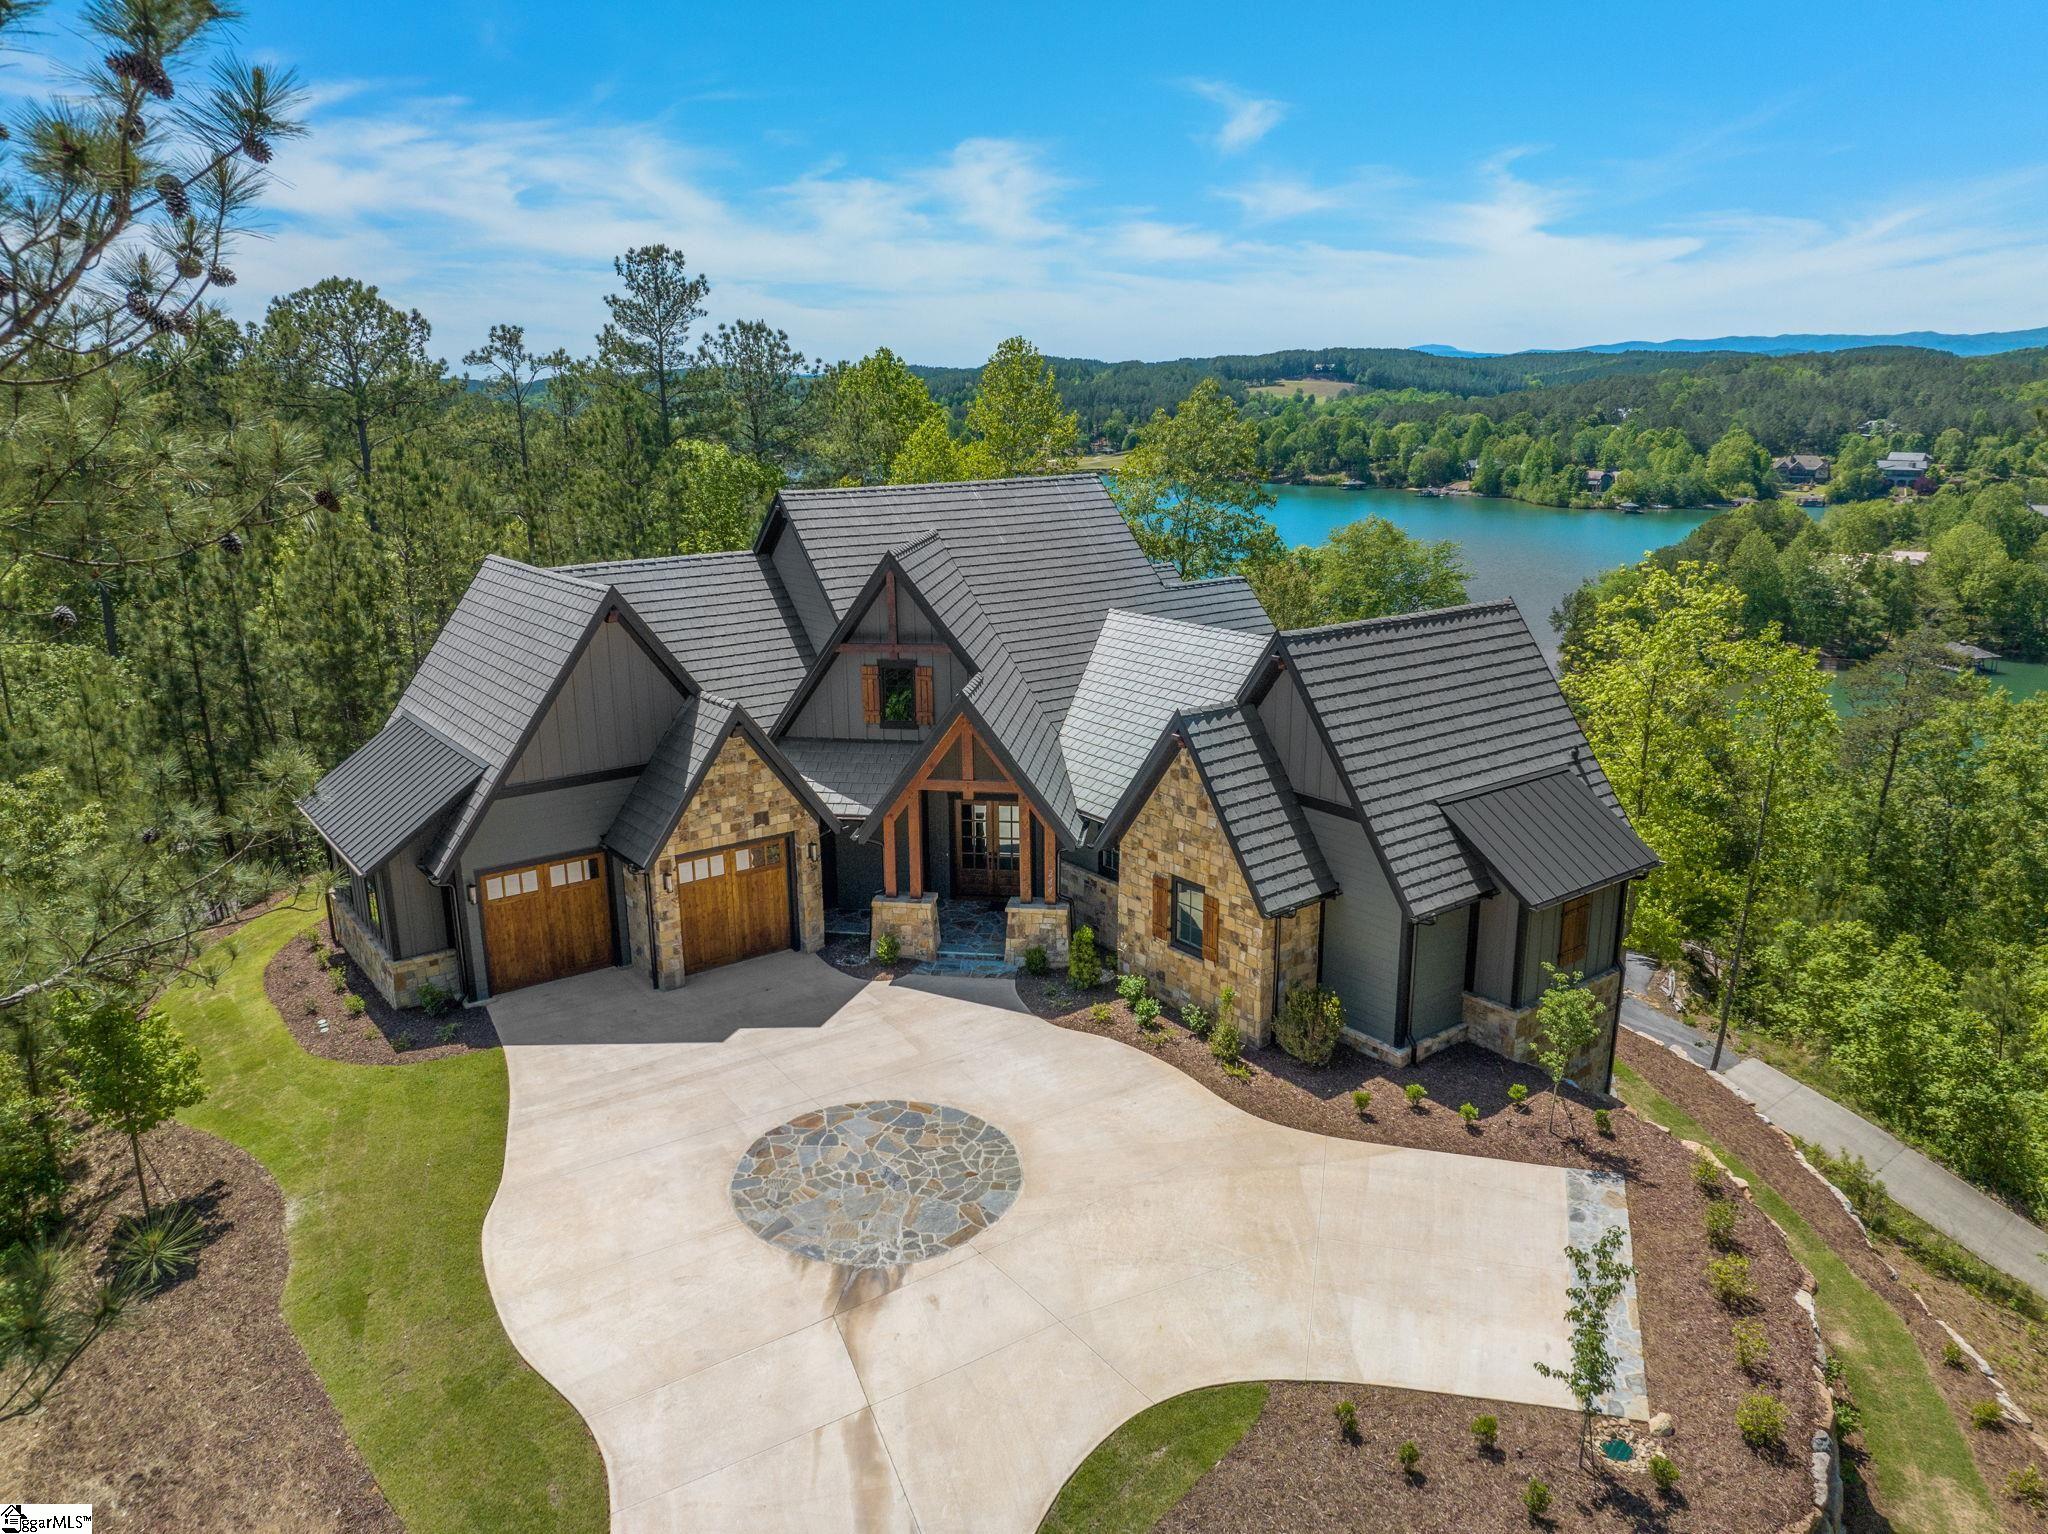 BRAND NEW HOME WITH PLUNGE POOL AND LAKE/MOUNTAIN VIEWS. If you have been searching for that elusive Lake Keowee home with a view, this is it! Views! Views! Views! This brand new, custom 4600 sf home in The Reserve, crafted by Arcon Architects & Builders (to be completed mid-November), sits high up on 1.3 very private acres overlooking crystal clear Lake Keowee and the great Smokey Mountains. Attention to detail is everywhere! Custom stonework, conditioned plunge pool with retractable cover, expansive decks with gas fireplaces, and so much more! The MAIN LEVEL master suite, with his & hers separate bathrooms and walk-in closets, has direct access to the main level deck. The highly desired open living/dining combination includes a gourmet kitchen, ideal for entertaining, with a stunning granite island, Thermador appliances, and a unique scullery with its own prep area and sink, double ovens, and abundant custom cabinetry. A step away is the Great Room with stone-encased electric fireplace, built-in display shelving, unique ceiling design with wood inlays, and floor-to-ceiling sliding glass doors with transom windows. The TERRACE LEVEL begins at its center with a spacious rec/sitting room opening directly to the covered patio, outdoor fireplace, and swimming pool. There is a full guest suite with private bath and patio access at one end, and a separate family suite with its own bedroom, bunk room, full bath and breakfast bar at the other end. Exiting off the pool deck is a terrace level mudroom with a half bath, plumbed for an additional washer/dryer. There is also existing plumbing and drain for an outdoor shower if desired. Loads of custom storage space, an unfinished safe room, and built-in shaft for a future elevator completes this level. There are thoughtful design features throughout: A two-car garage with ample space for work benches and storage including an elevated roof on one side designed for the installation of a car lift. Entering from the garage, there is a mudroom, walk-in coat room, and a large laundry room. The lower-level mechanical room even has its own entrance. The Reserve at Lake Keowee offers a Jack Nicklaus Signature Golf Course, a par 3 practice facility with driving range, Clubhouse with fine dining, pub area and wine bar, Fitness Center, Hiking Trails, Har-Tru Clay Tennis Courts, Lakeside Resort-Style Pool and Cabana, Settlement Pool, new Pickleball Courts, Marina offering both slips and boat rentals, and Market great for lunch and select provisions. This gated community offers many activities including fitness classes, various social clubs, and a high-speed fiber-optic internet system in place. The Reserve at Lake Keowee is a full amenity lakefront golf community. Must see! Start making your memories today! Sports Membership is required at closing.